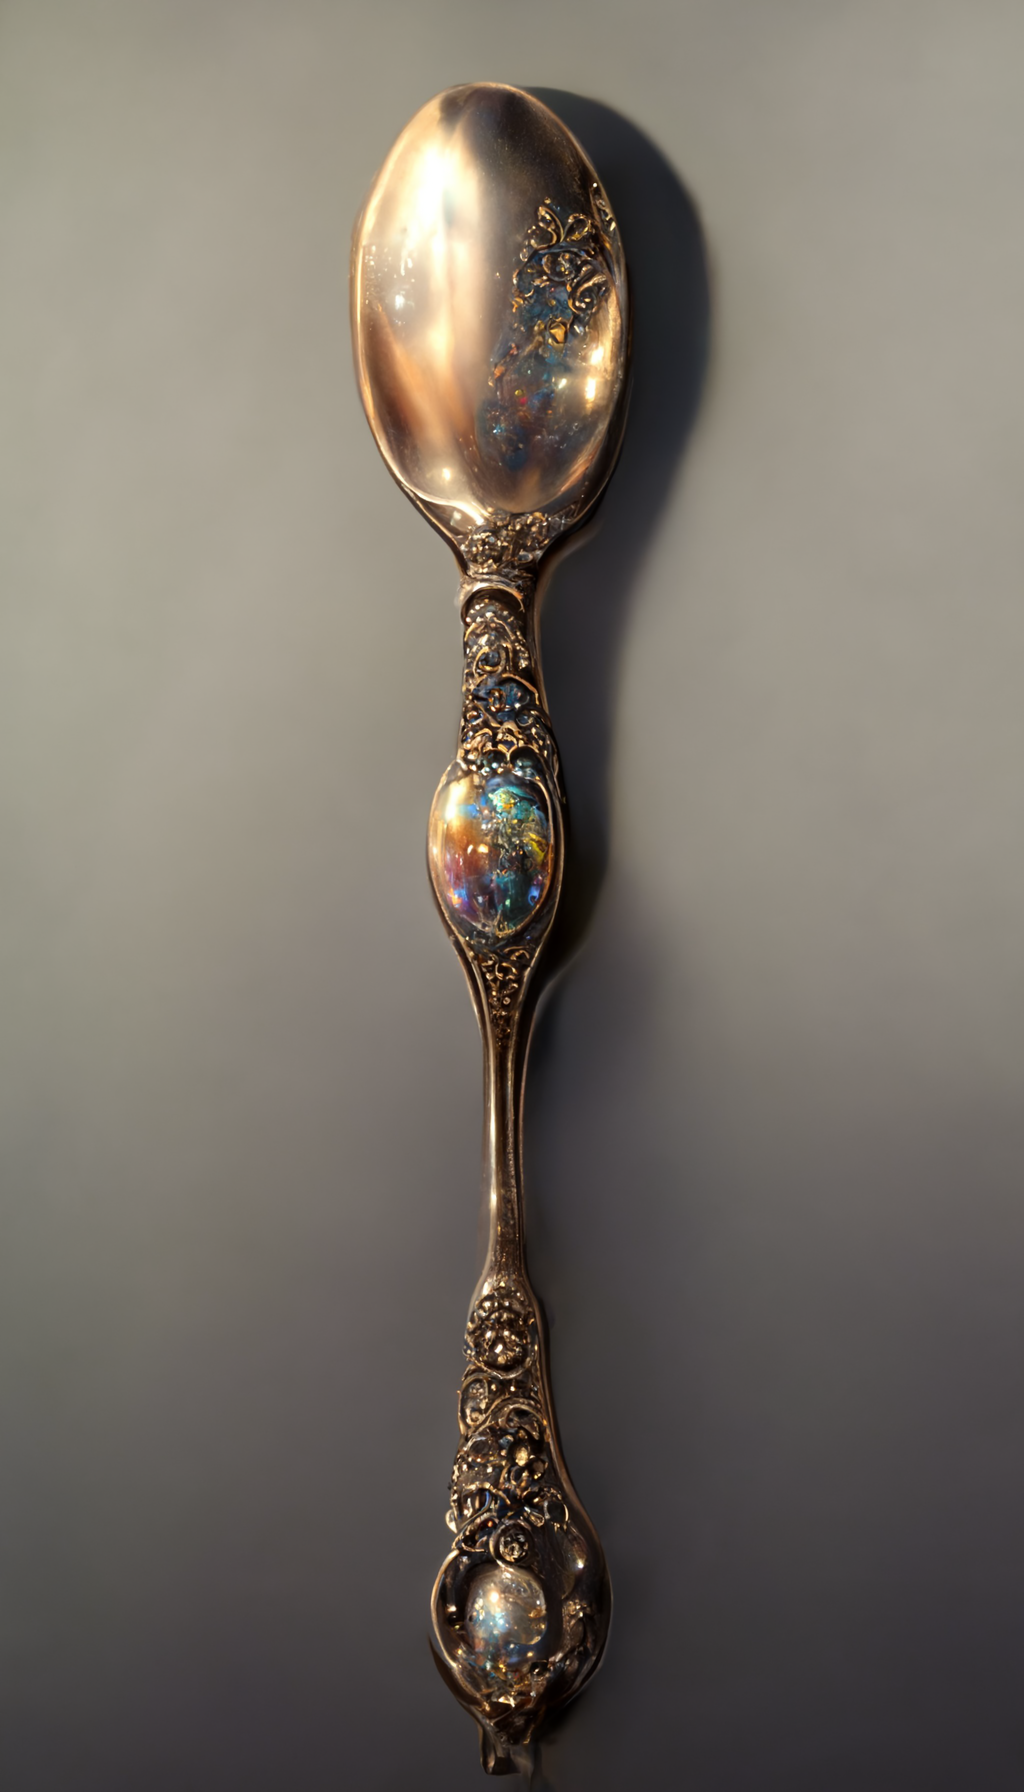 The Haunted Spoon